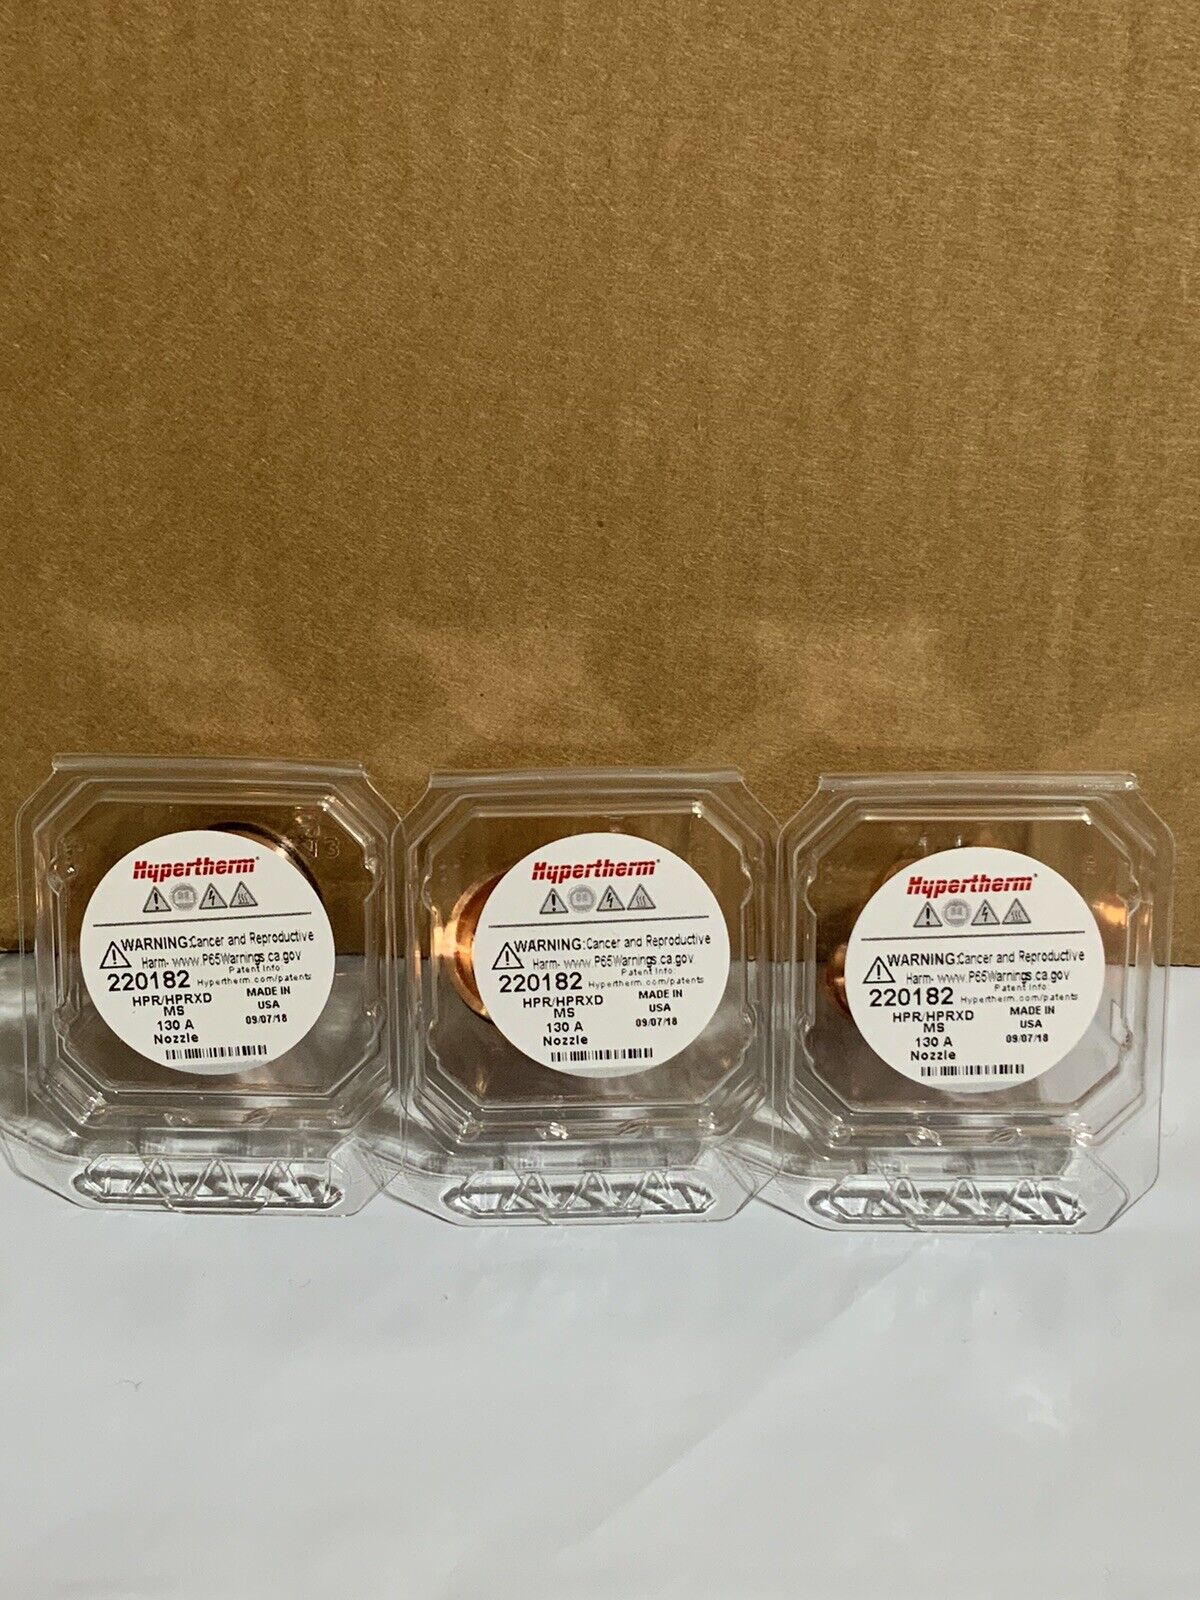 BRAND NEW LOT OF 3 HYPERTHERM 220182 130A NOZZLE.            **FREE SHIPPING**